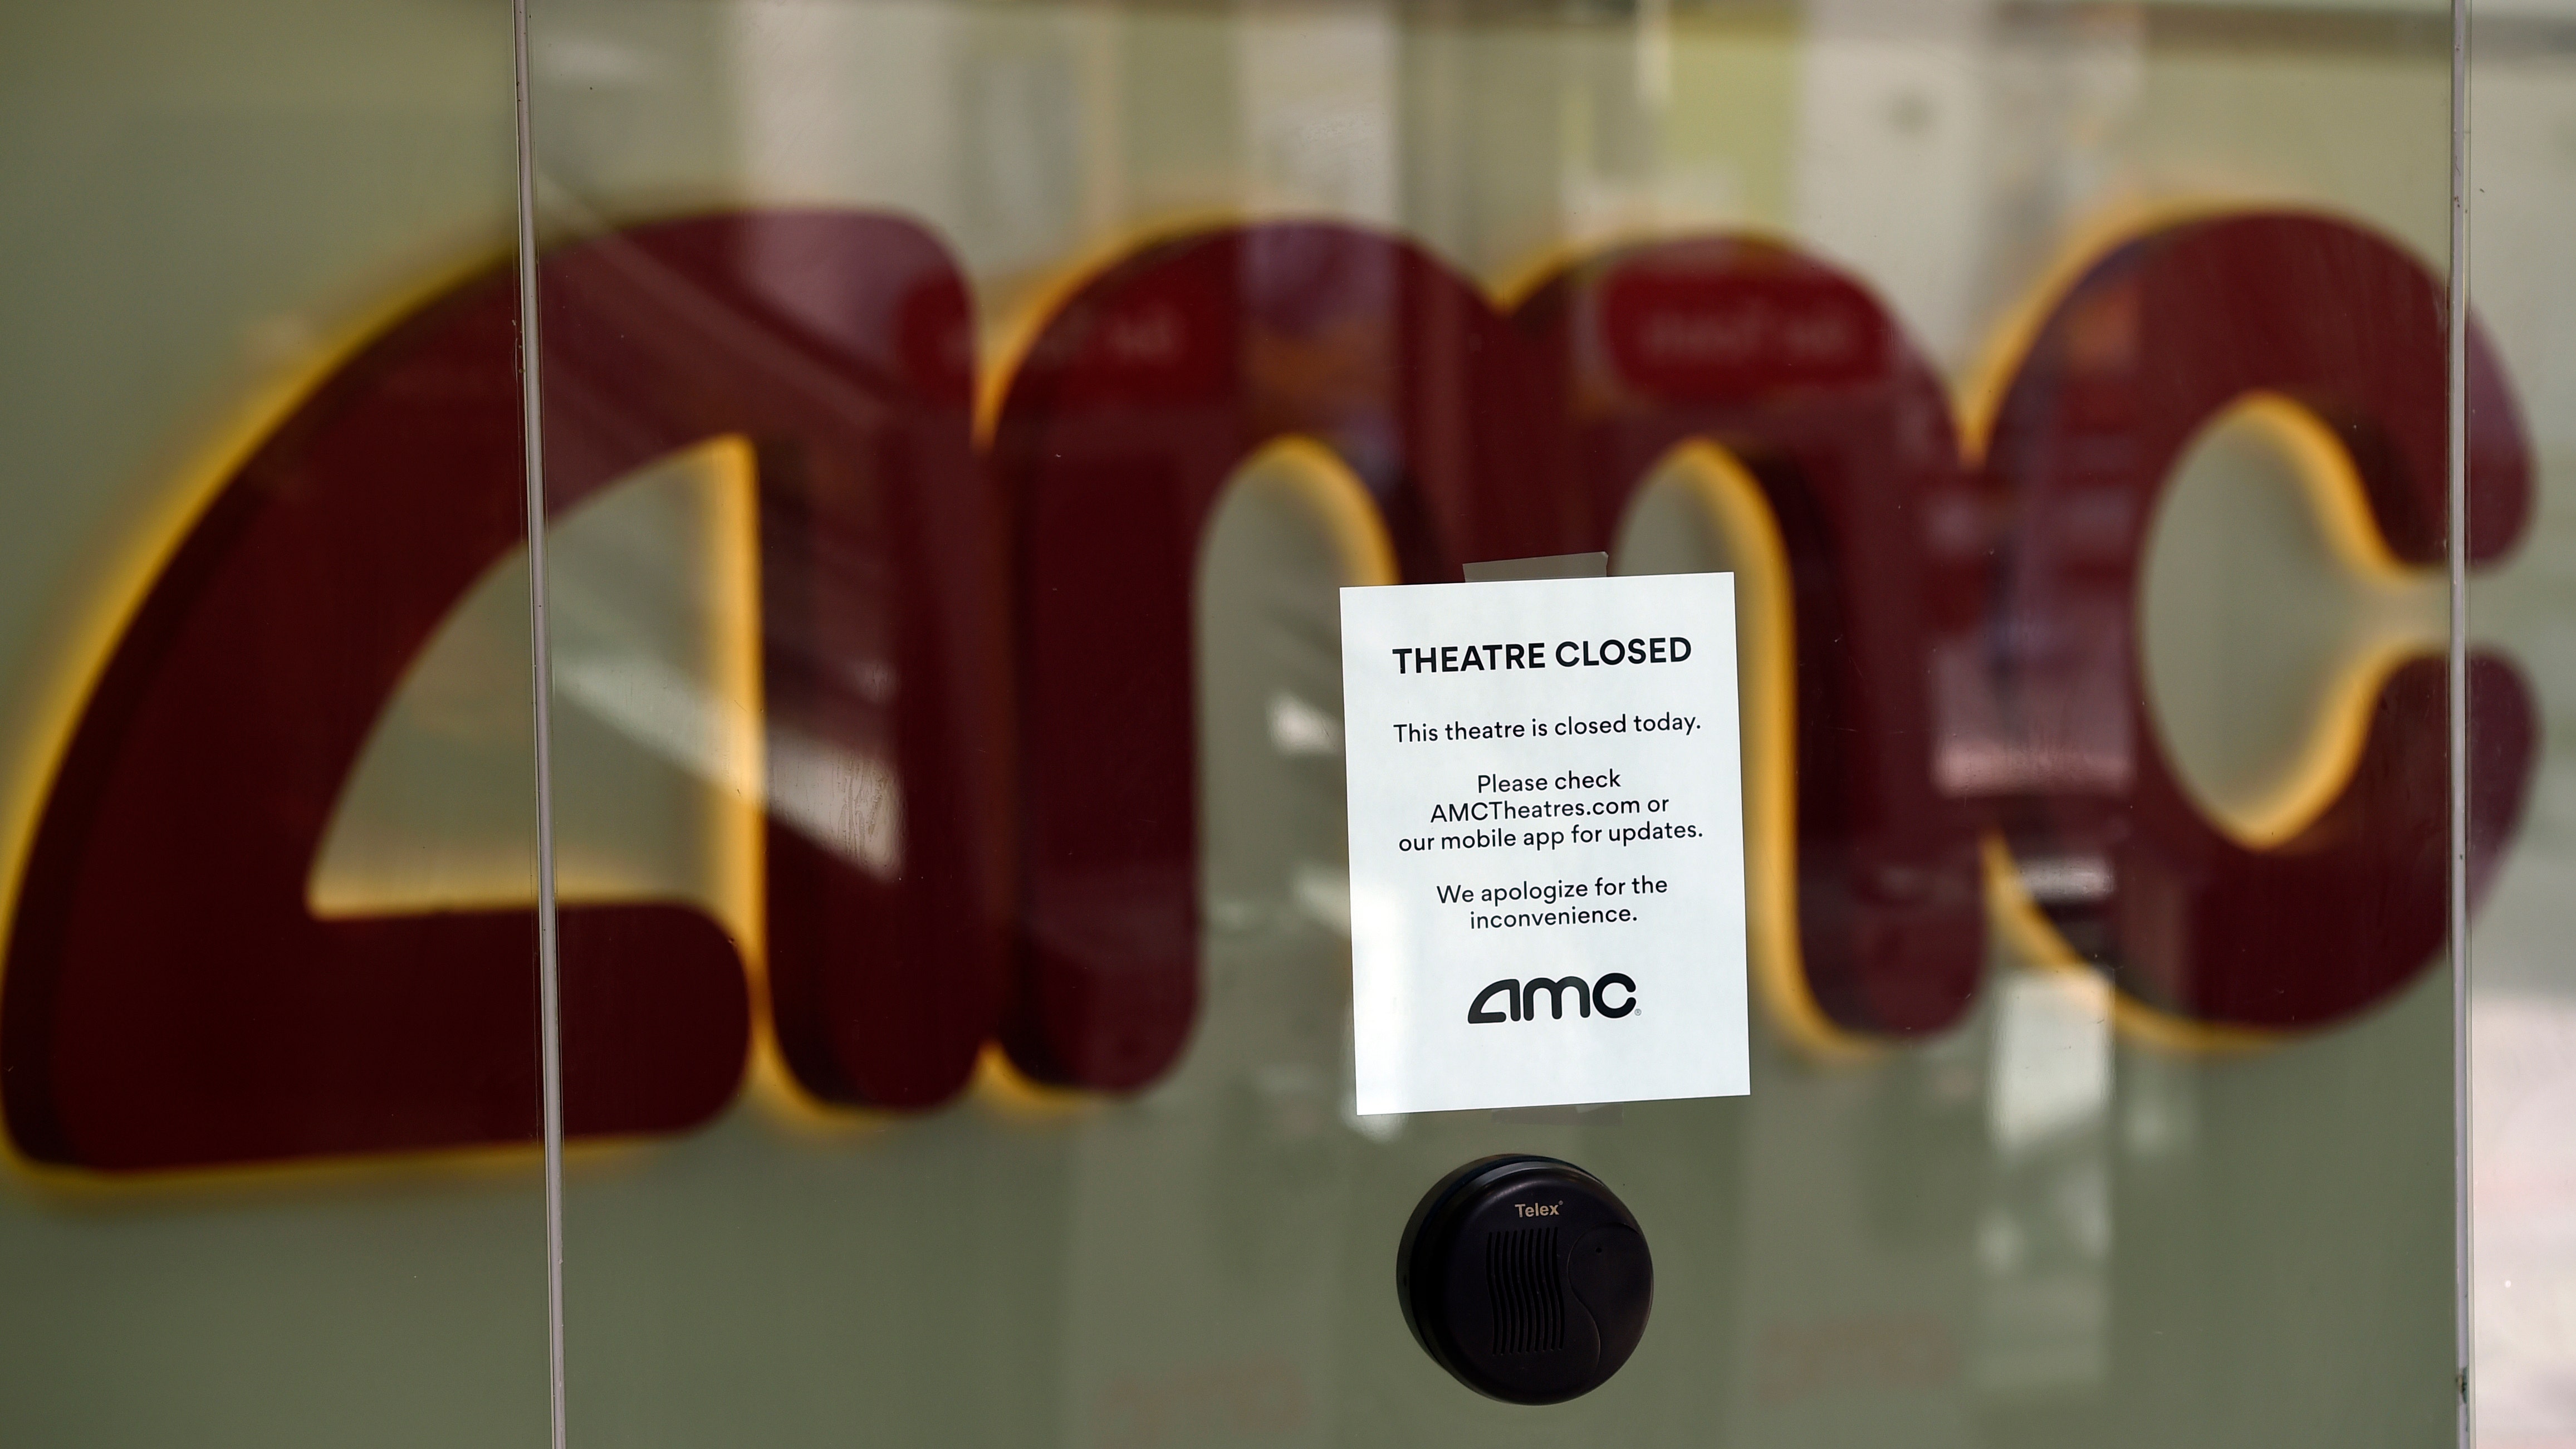 Movie theater chain AMC warns it may shutter permanently because of pandemic - Fox News